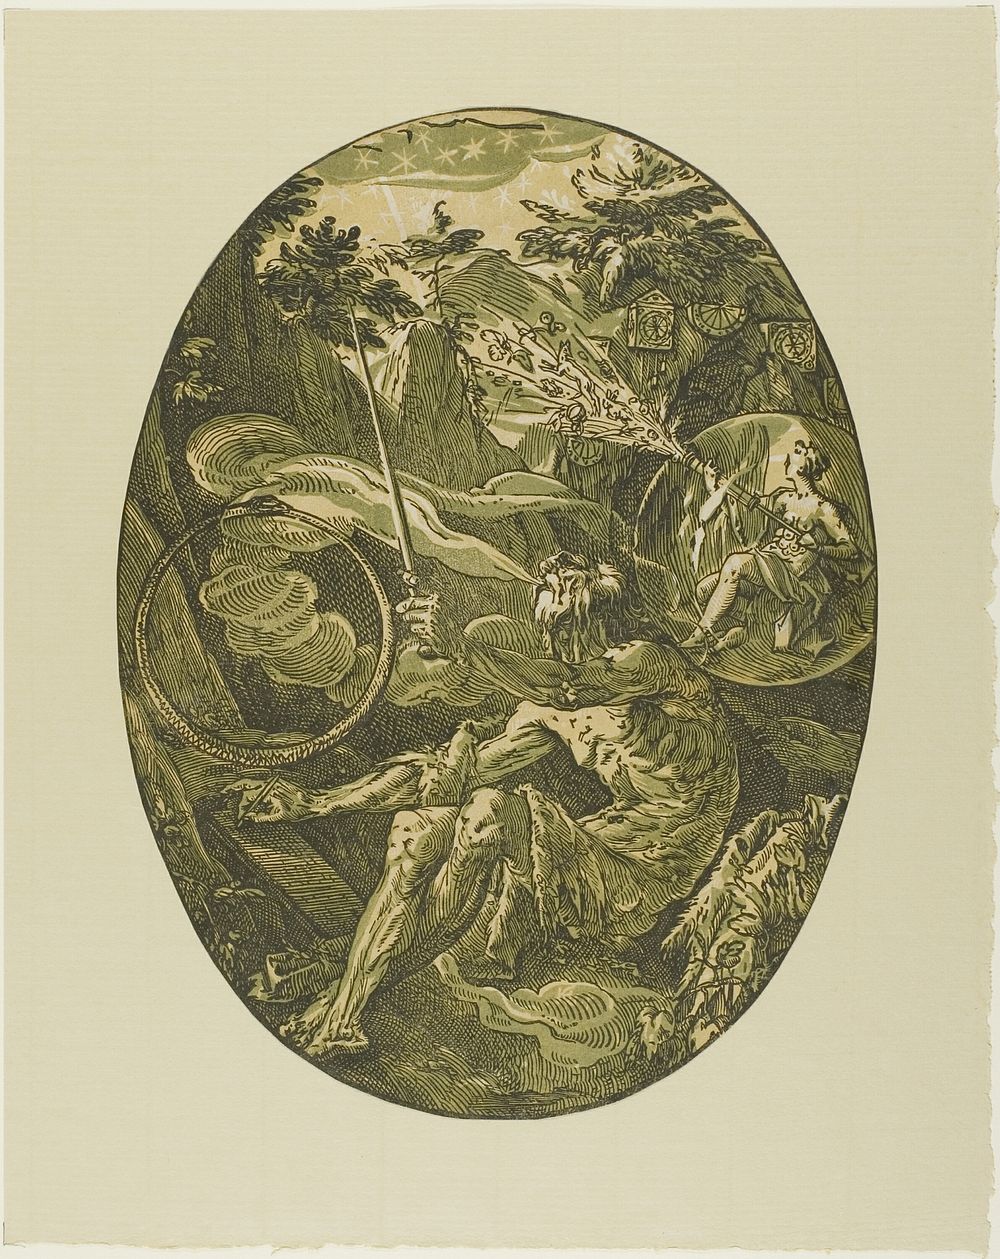 Demogorgon in the Cave of Eternity, plate one from Demogorgon and the Deities by Hendrick Goltzius